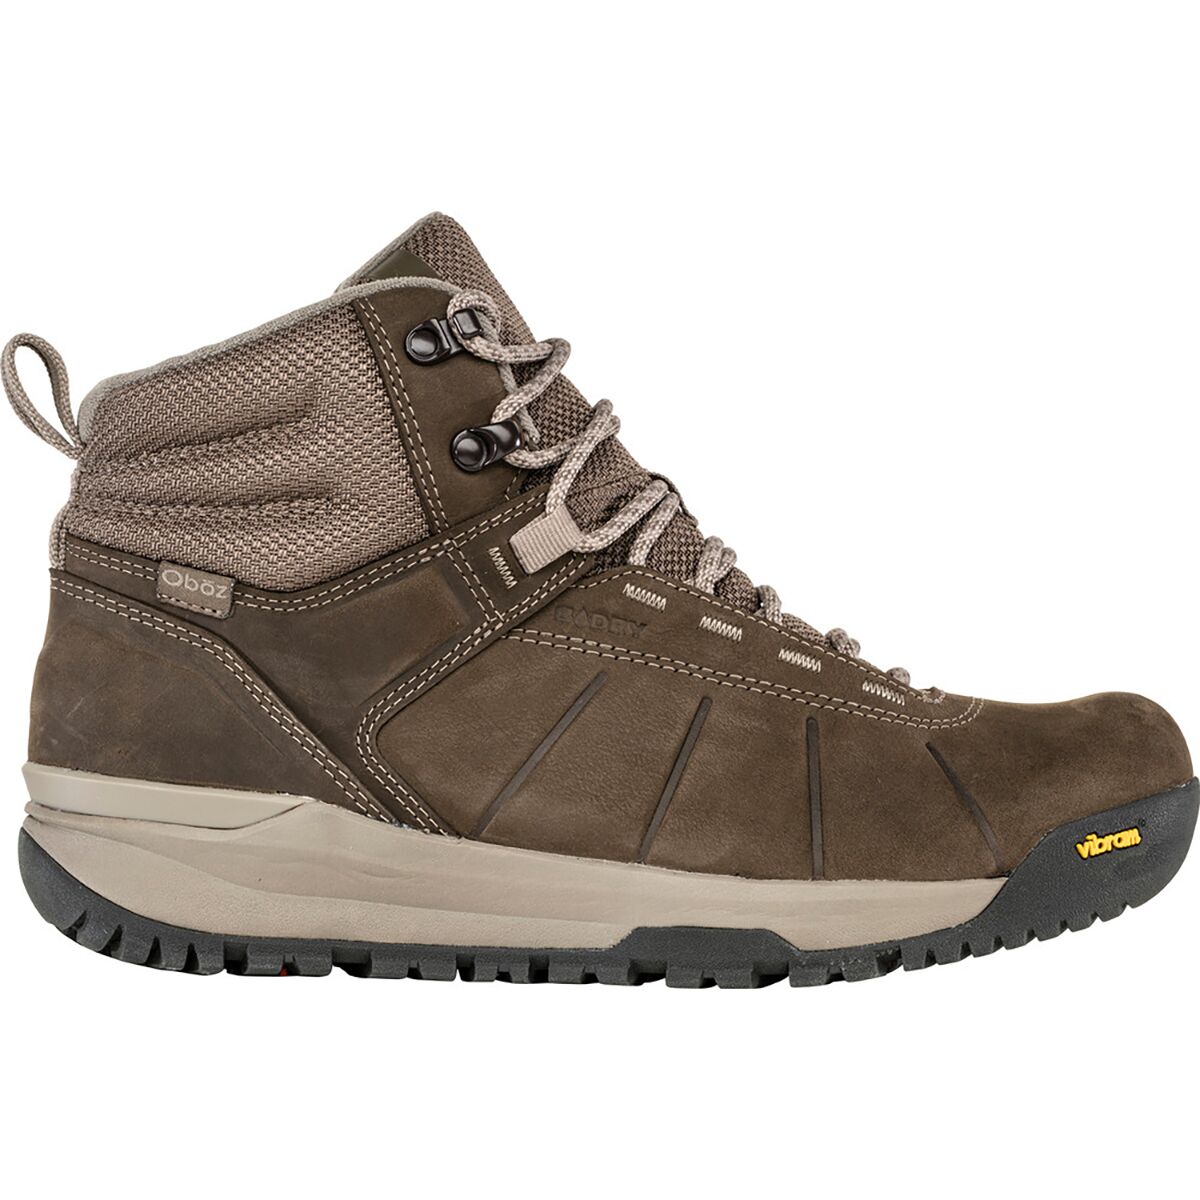 Oboz Andesite Mid Insulated B-DRY Boot - Men's